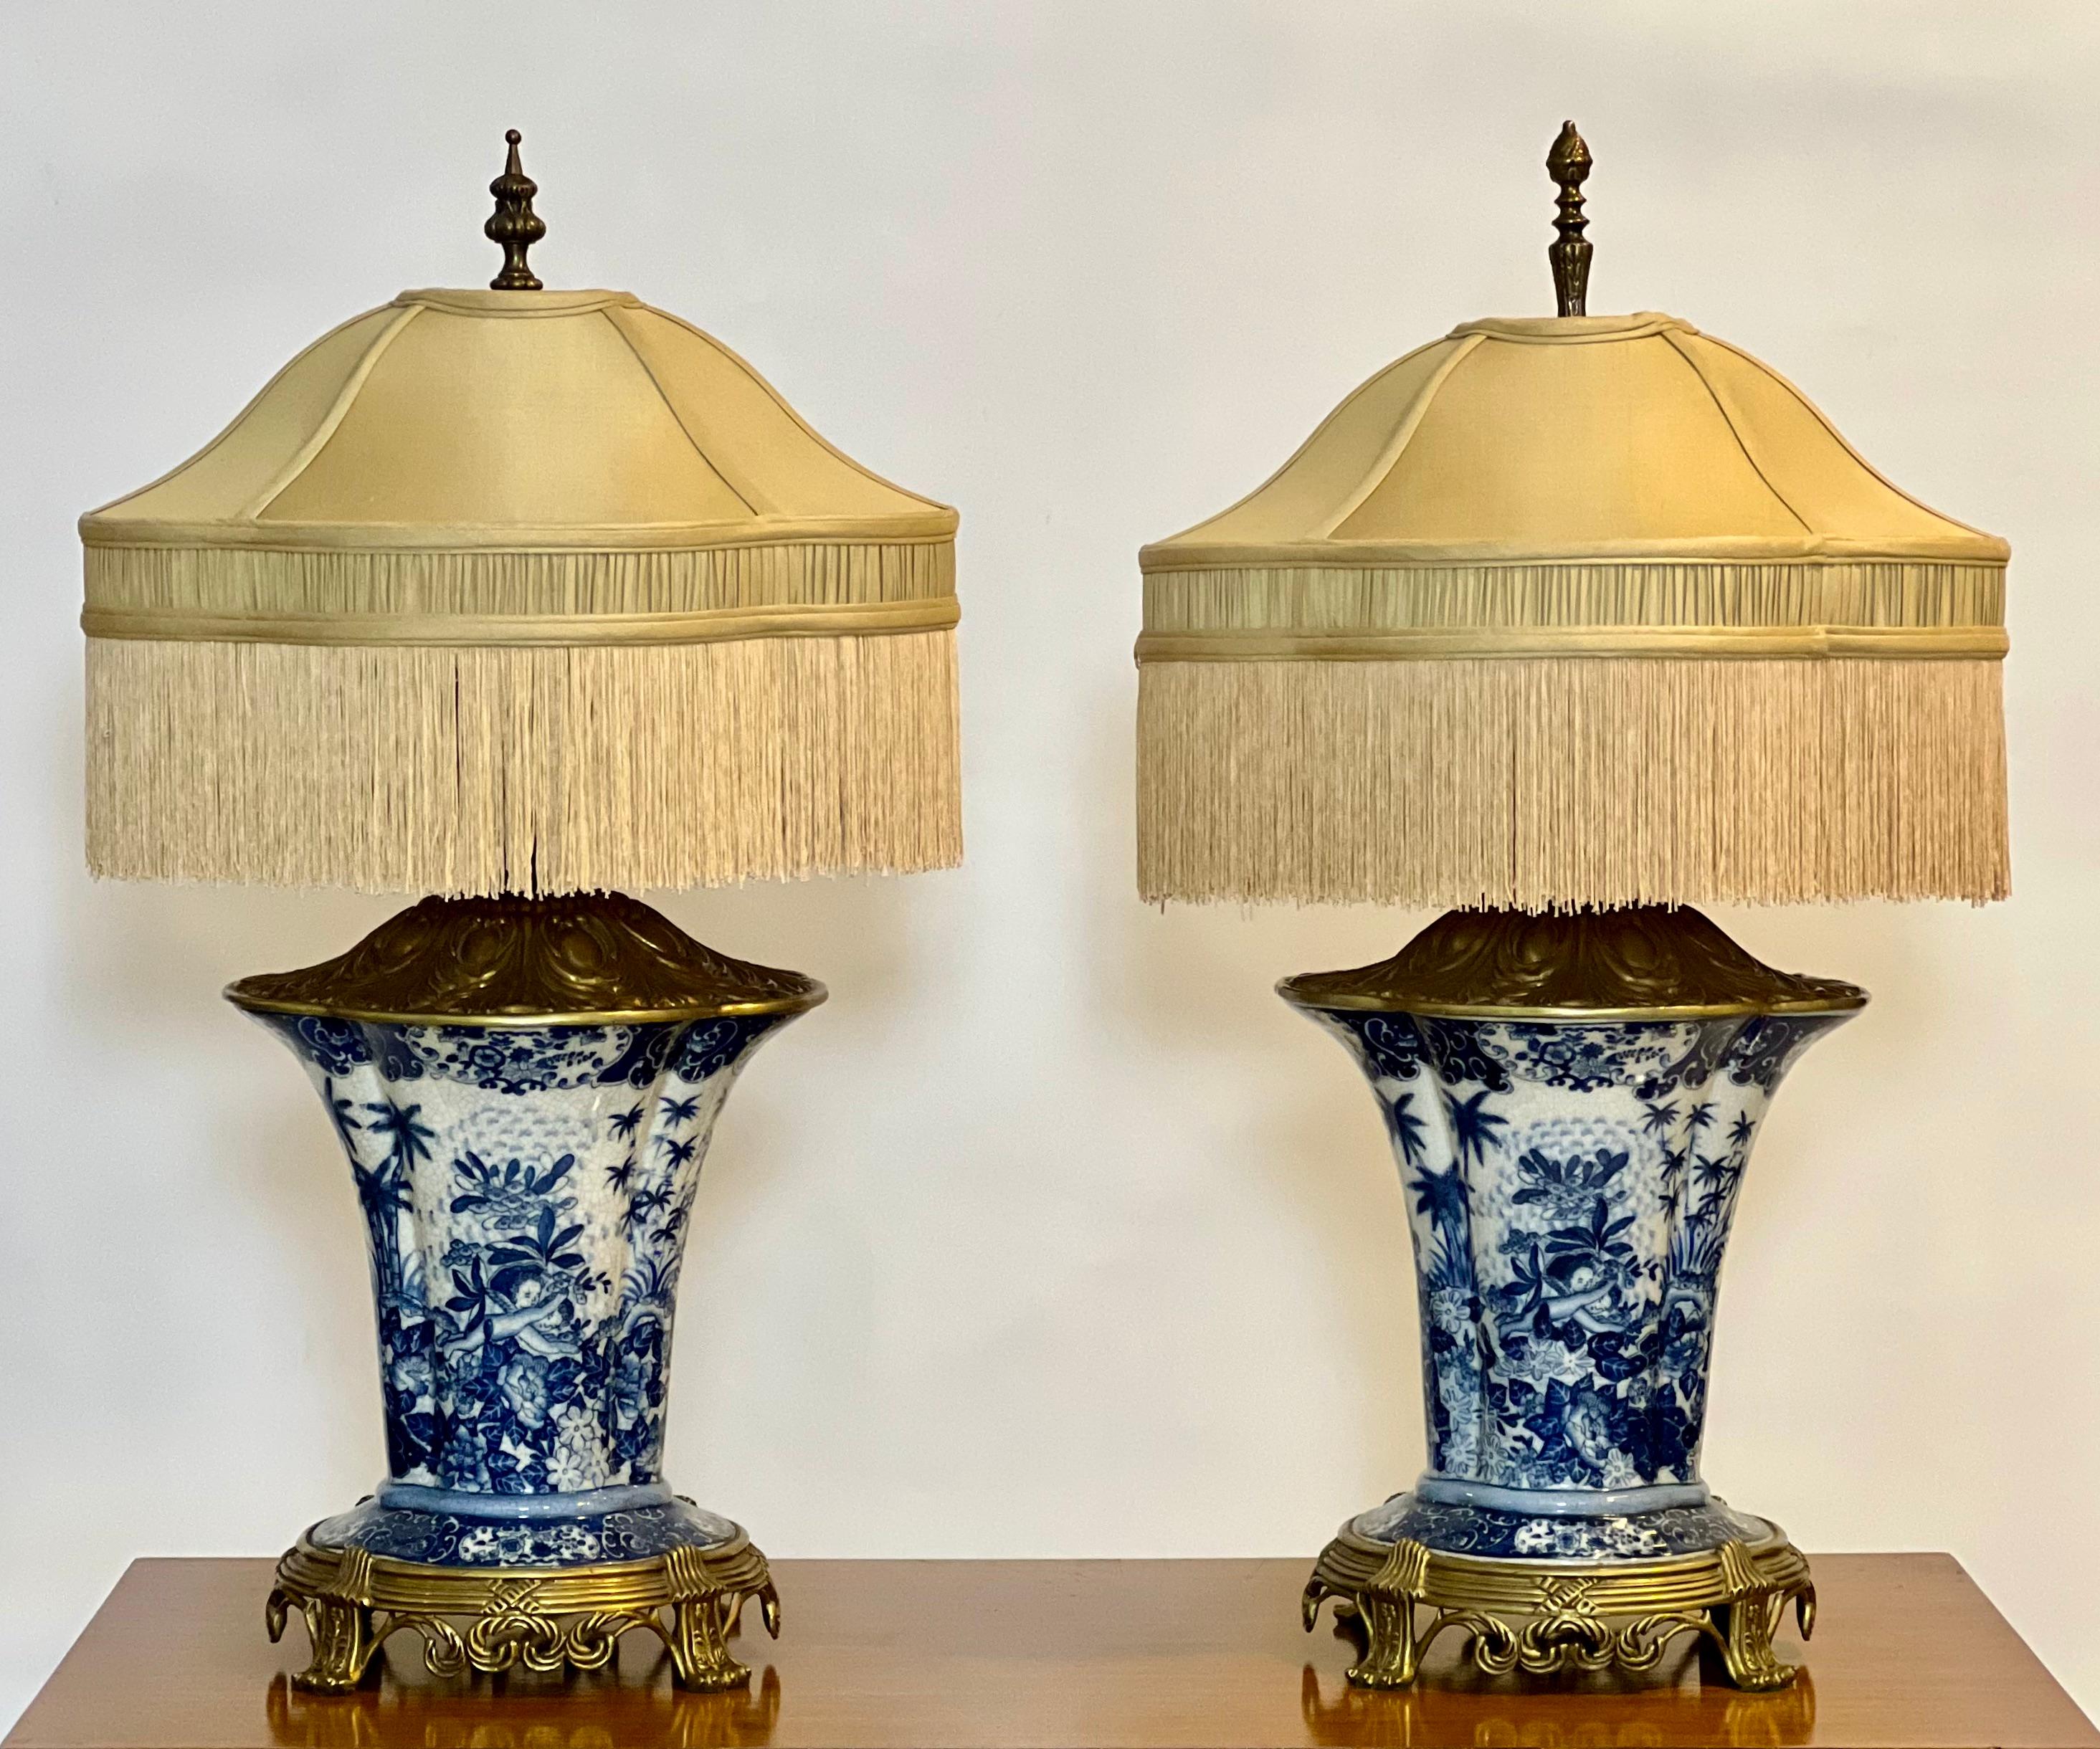 Pair of late 20th century ormolu and crackle porcelain lamps by United Wilson Porcelain, signed.

Stunning blue and white vase form lamps with ornate ormolu mounts. Part of United Wilson's ormolu series inspired by 18th century French antiques, the